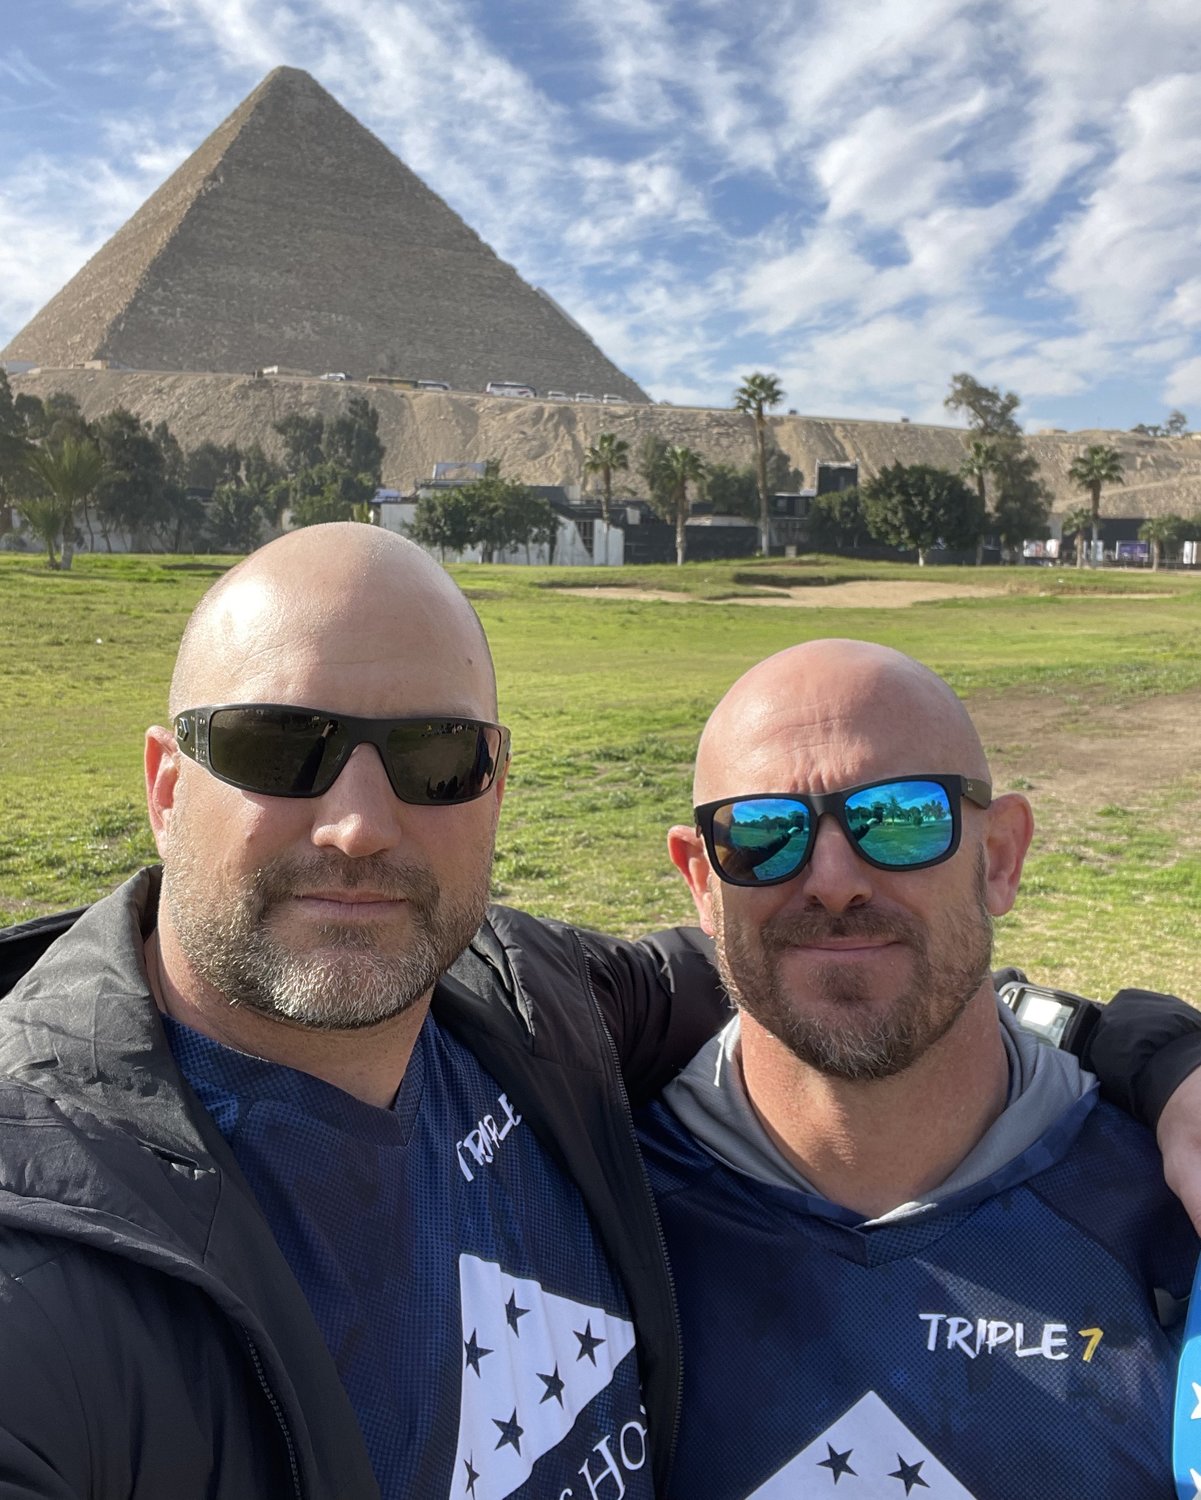 Triple 7 Expedition: Cairo, Egypt